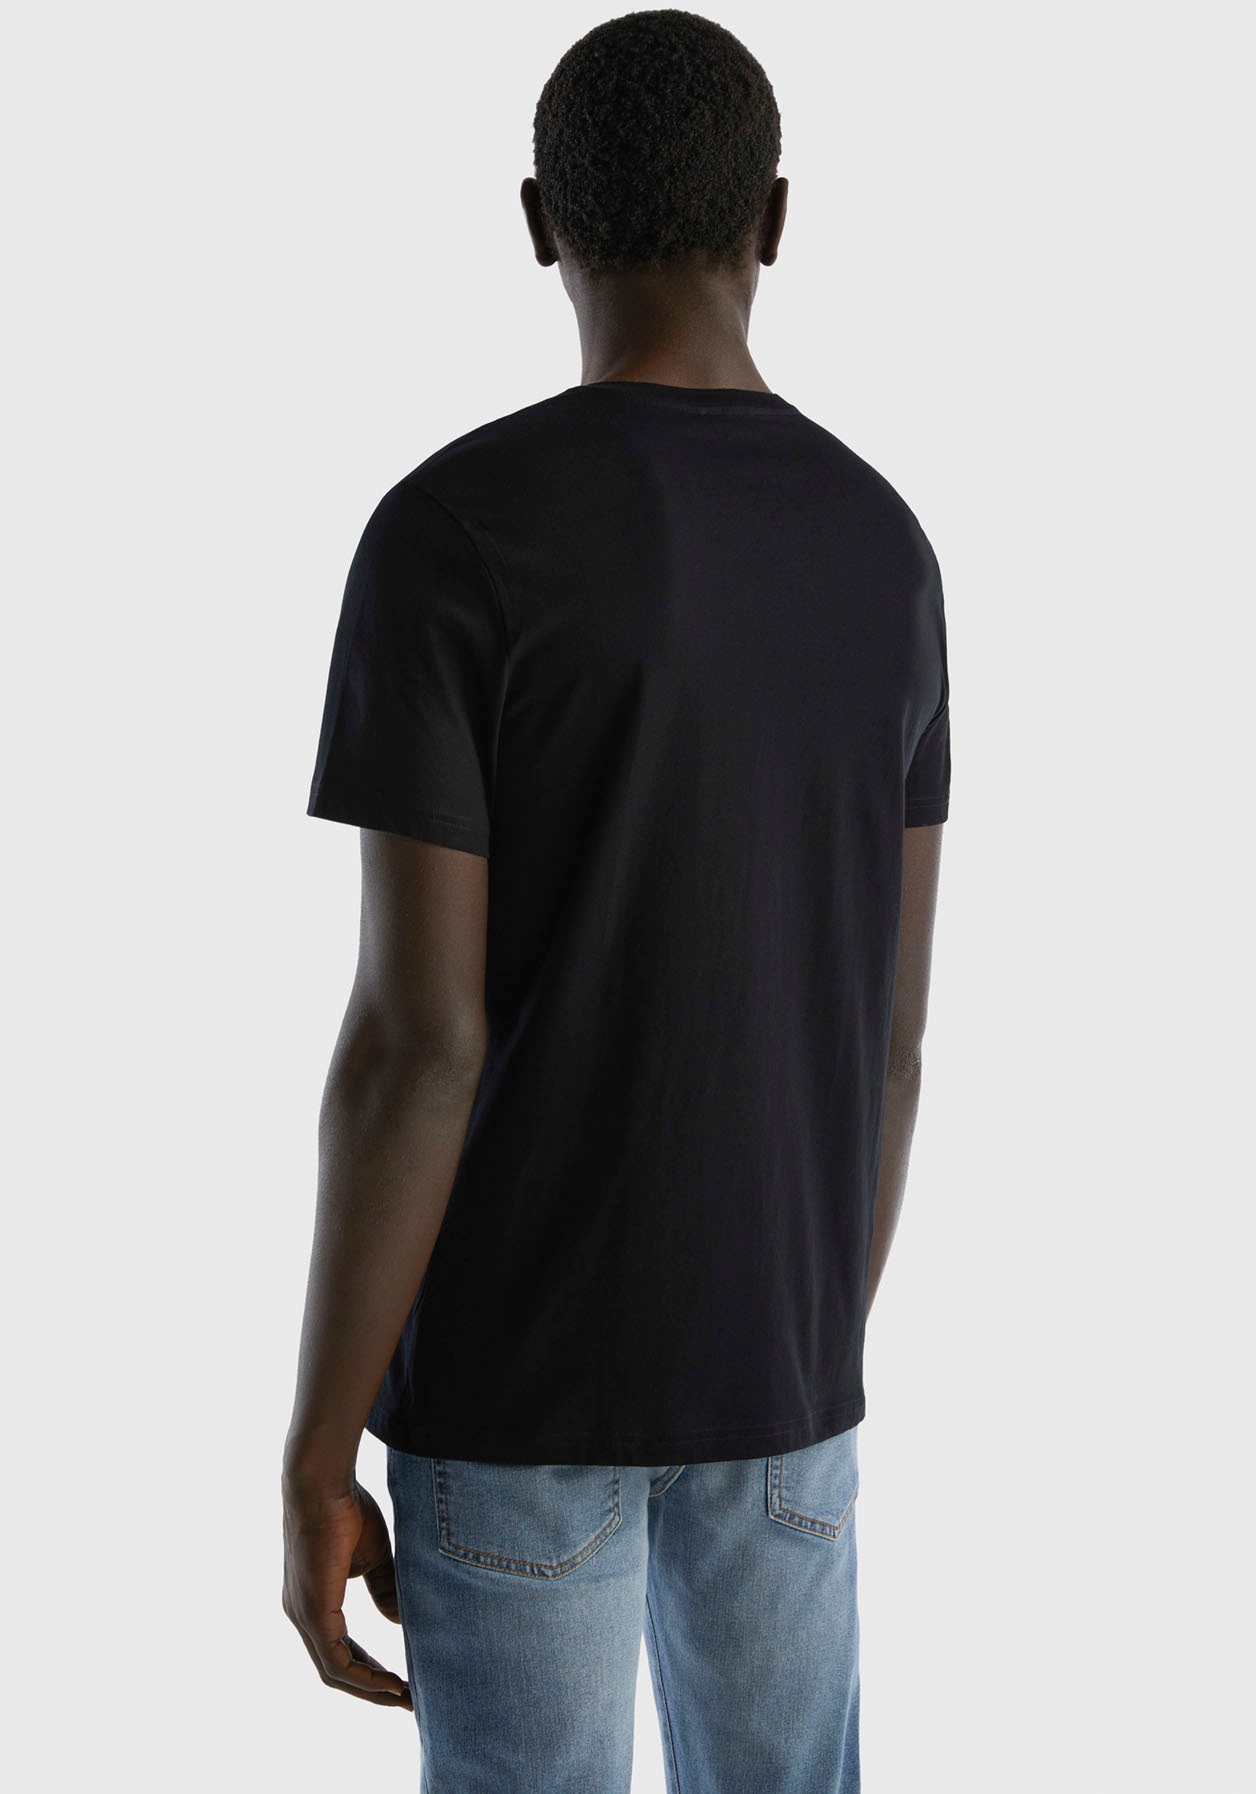 United Colors of shoppen in Basic-Form T-Shirt, OTTO Benetton online cleaner bei